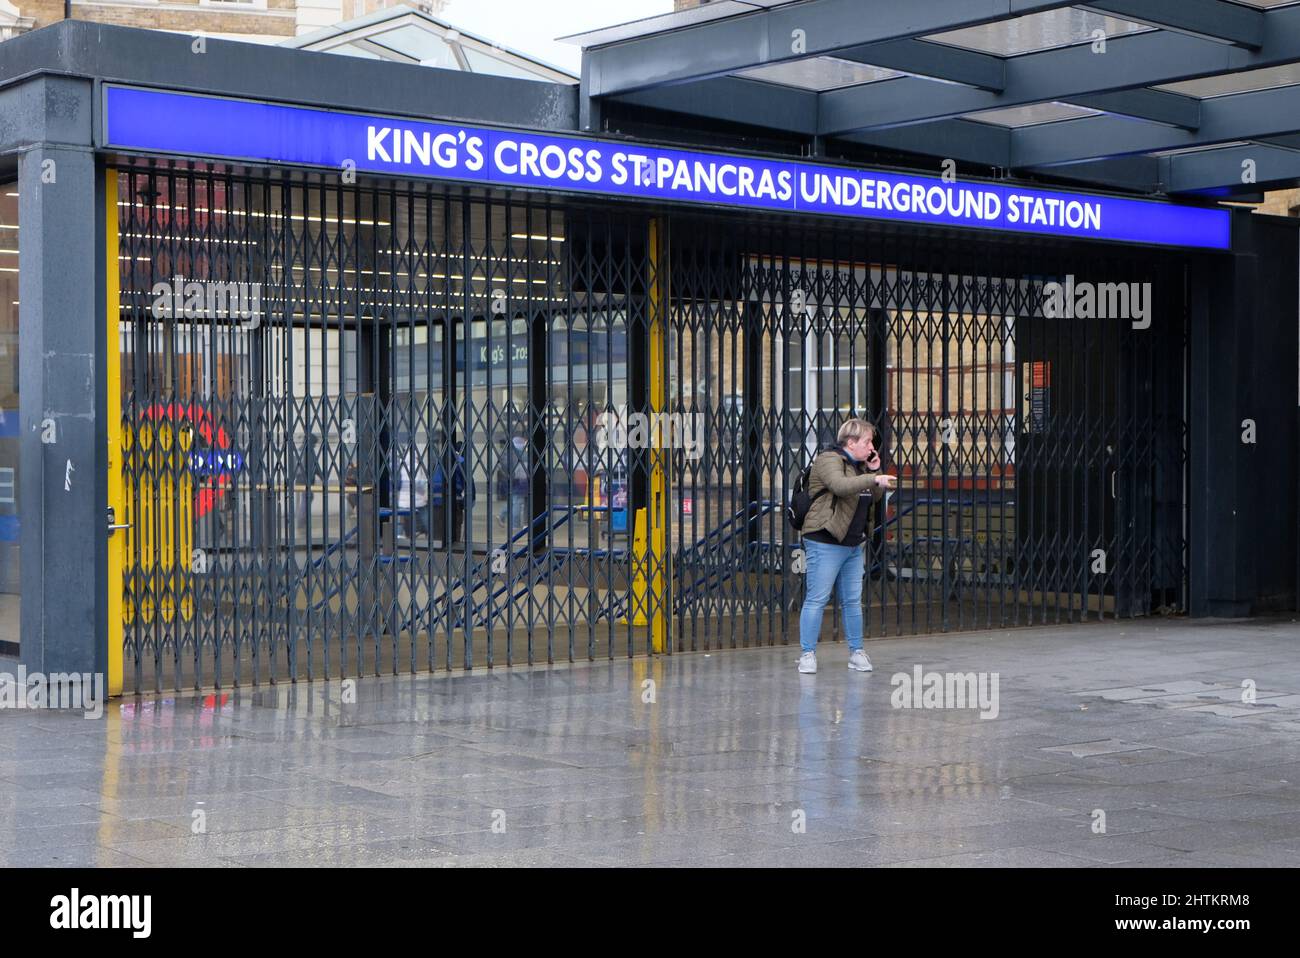 London, UK, 1st Mar, 2022. A woman stands outside a shuttered King's Cross St. Pancras Undergound Station as visitors and commuters found alternative ways to complete their journey this afternoon, via bus, taxi or cycling, amid a Tube strike affecting all services. The strike called by the RMT Union over threats of 600 job losses and pension cuts saw 10,000 staff walk out. Credit: Eleventh Hour Photography/Alamy Live News Stock Photo